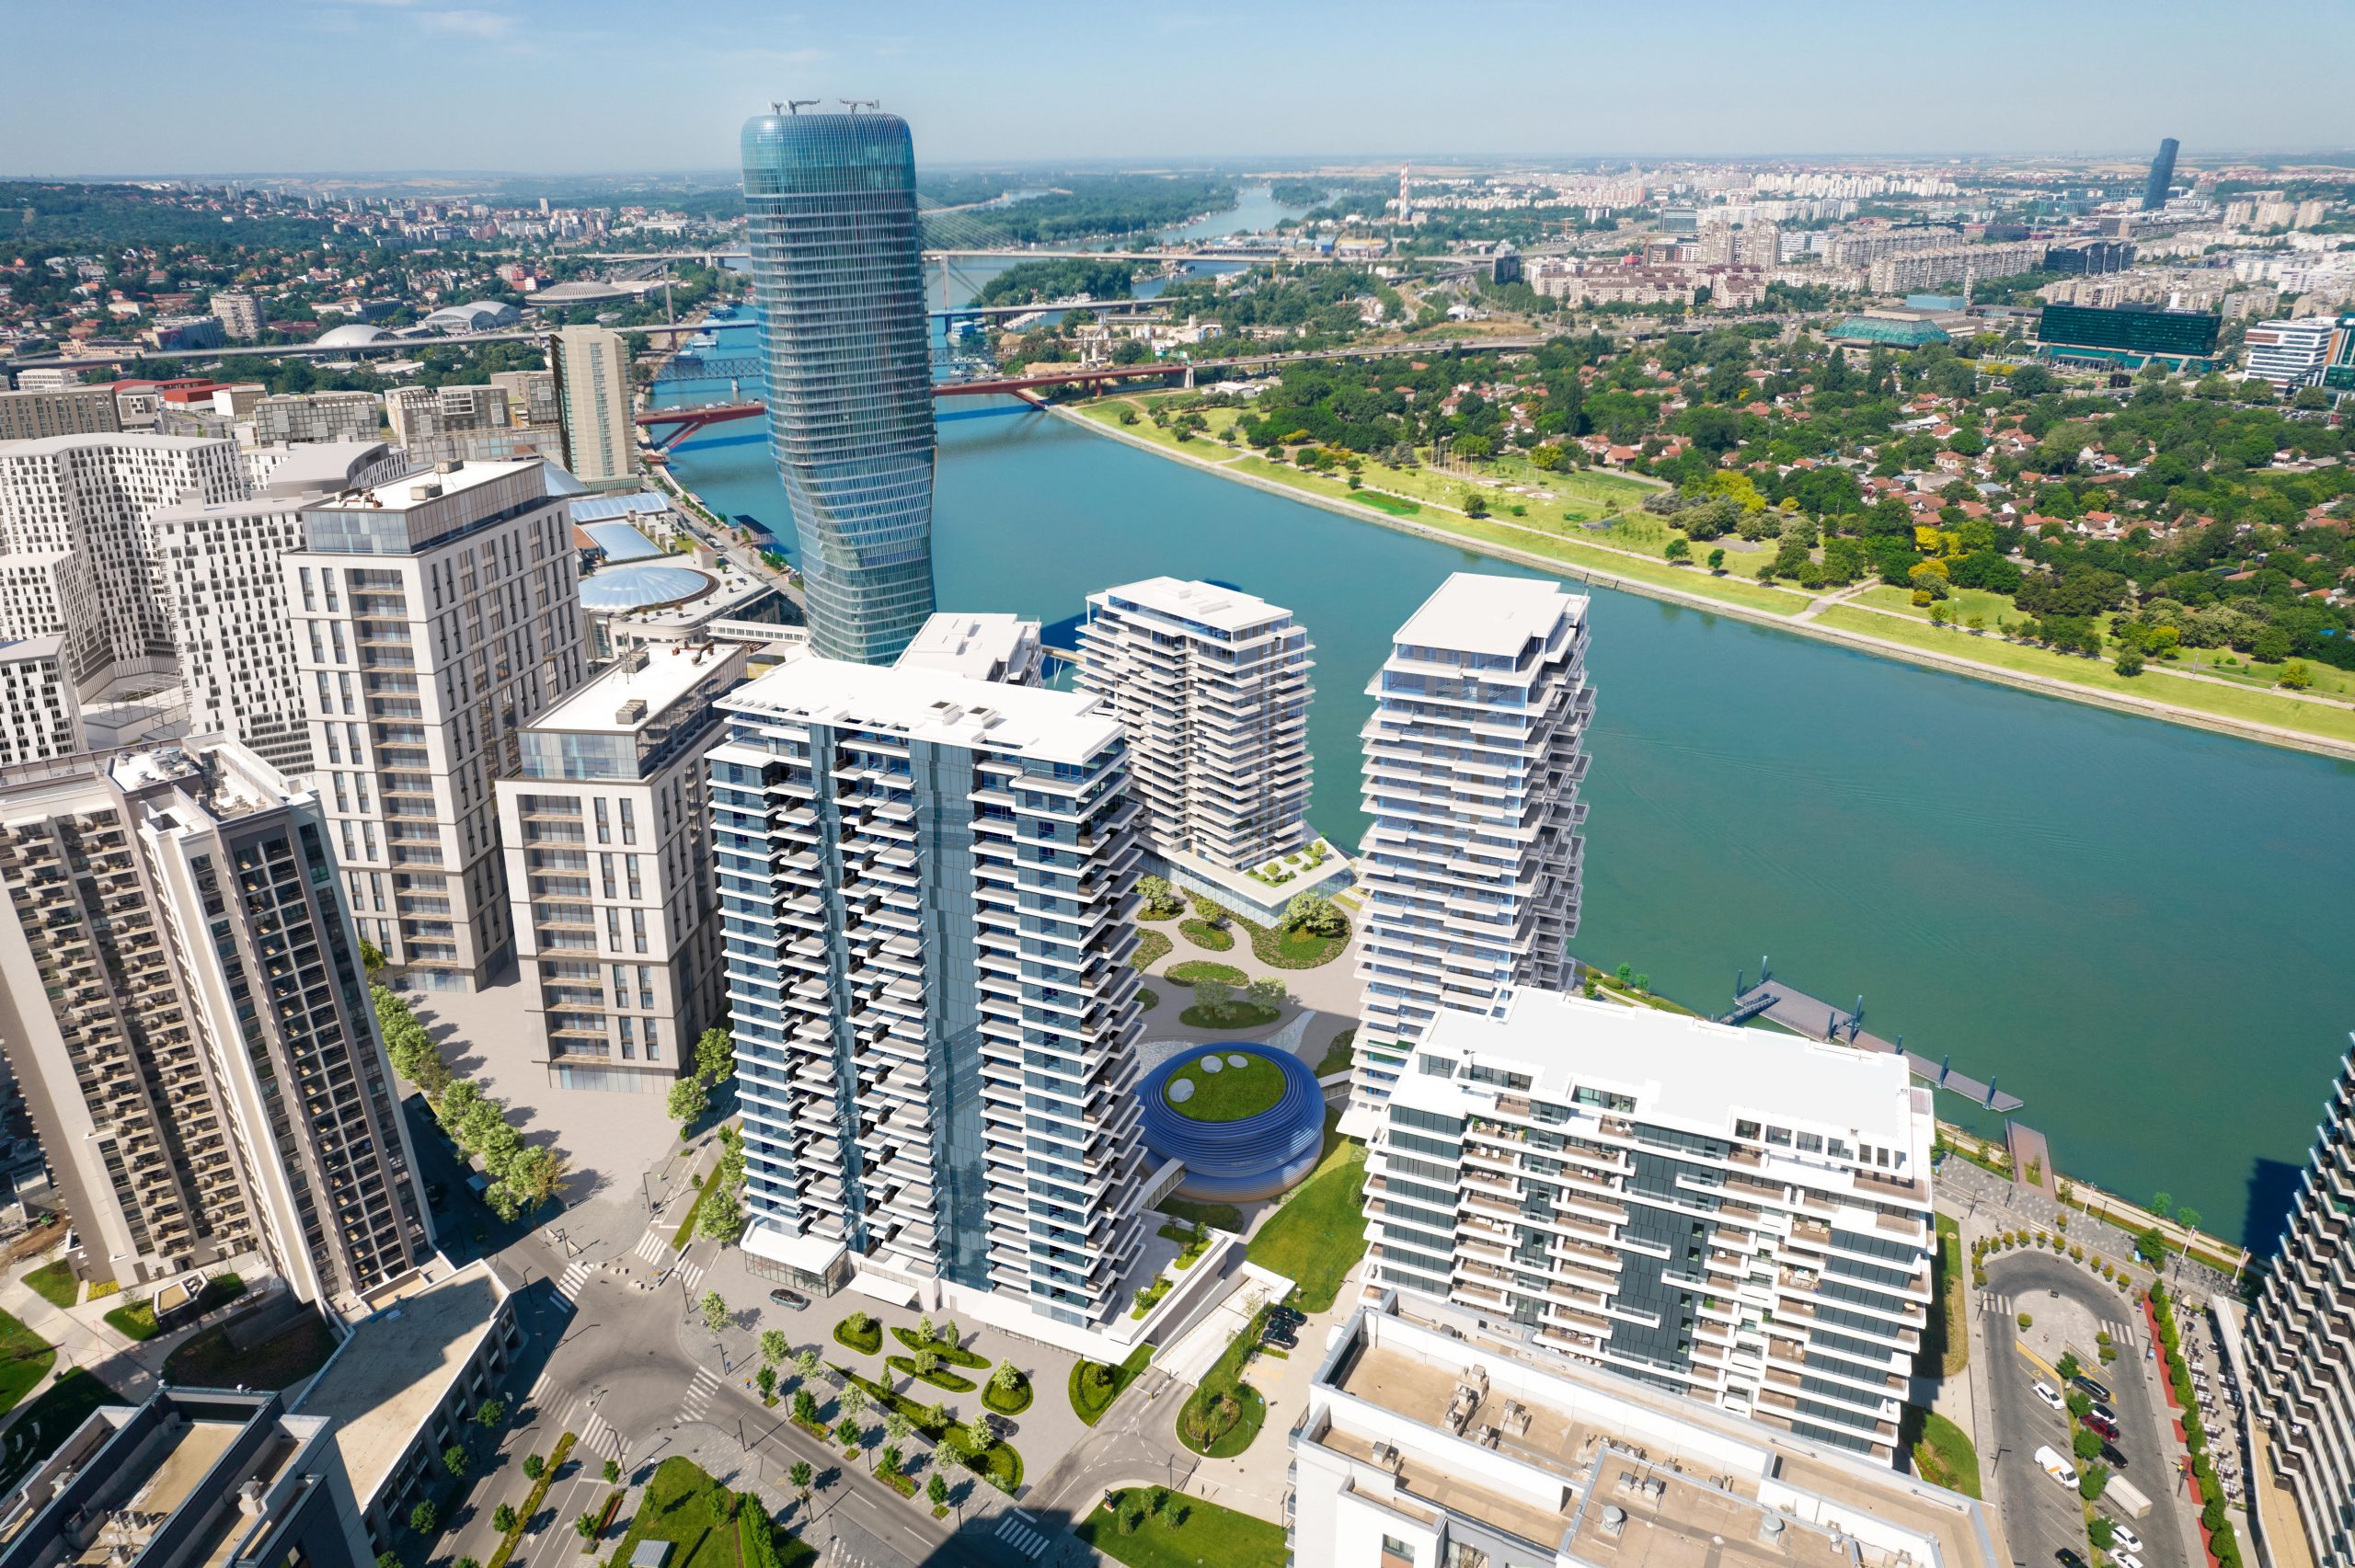 RMJM Serbia has revealed their design for BW Perla – a landmark residential building of Belgrade Waterfront.